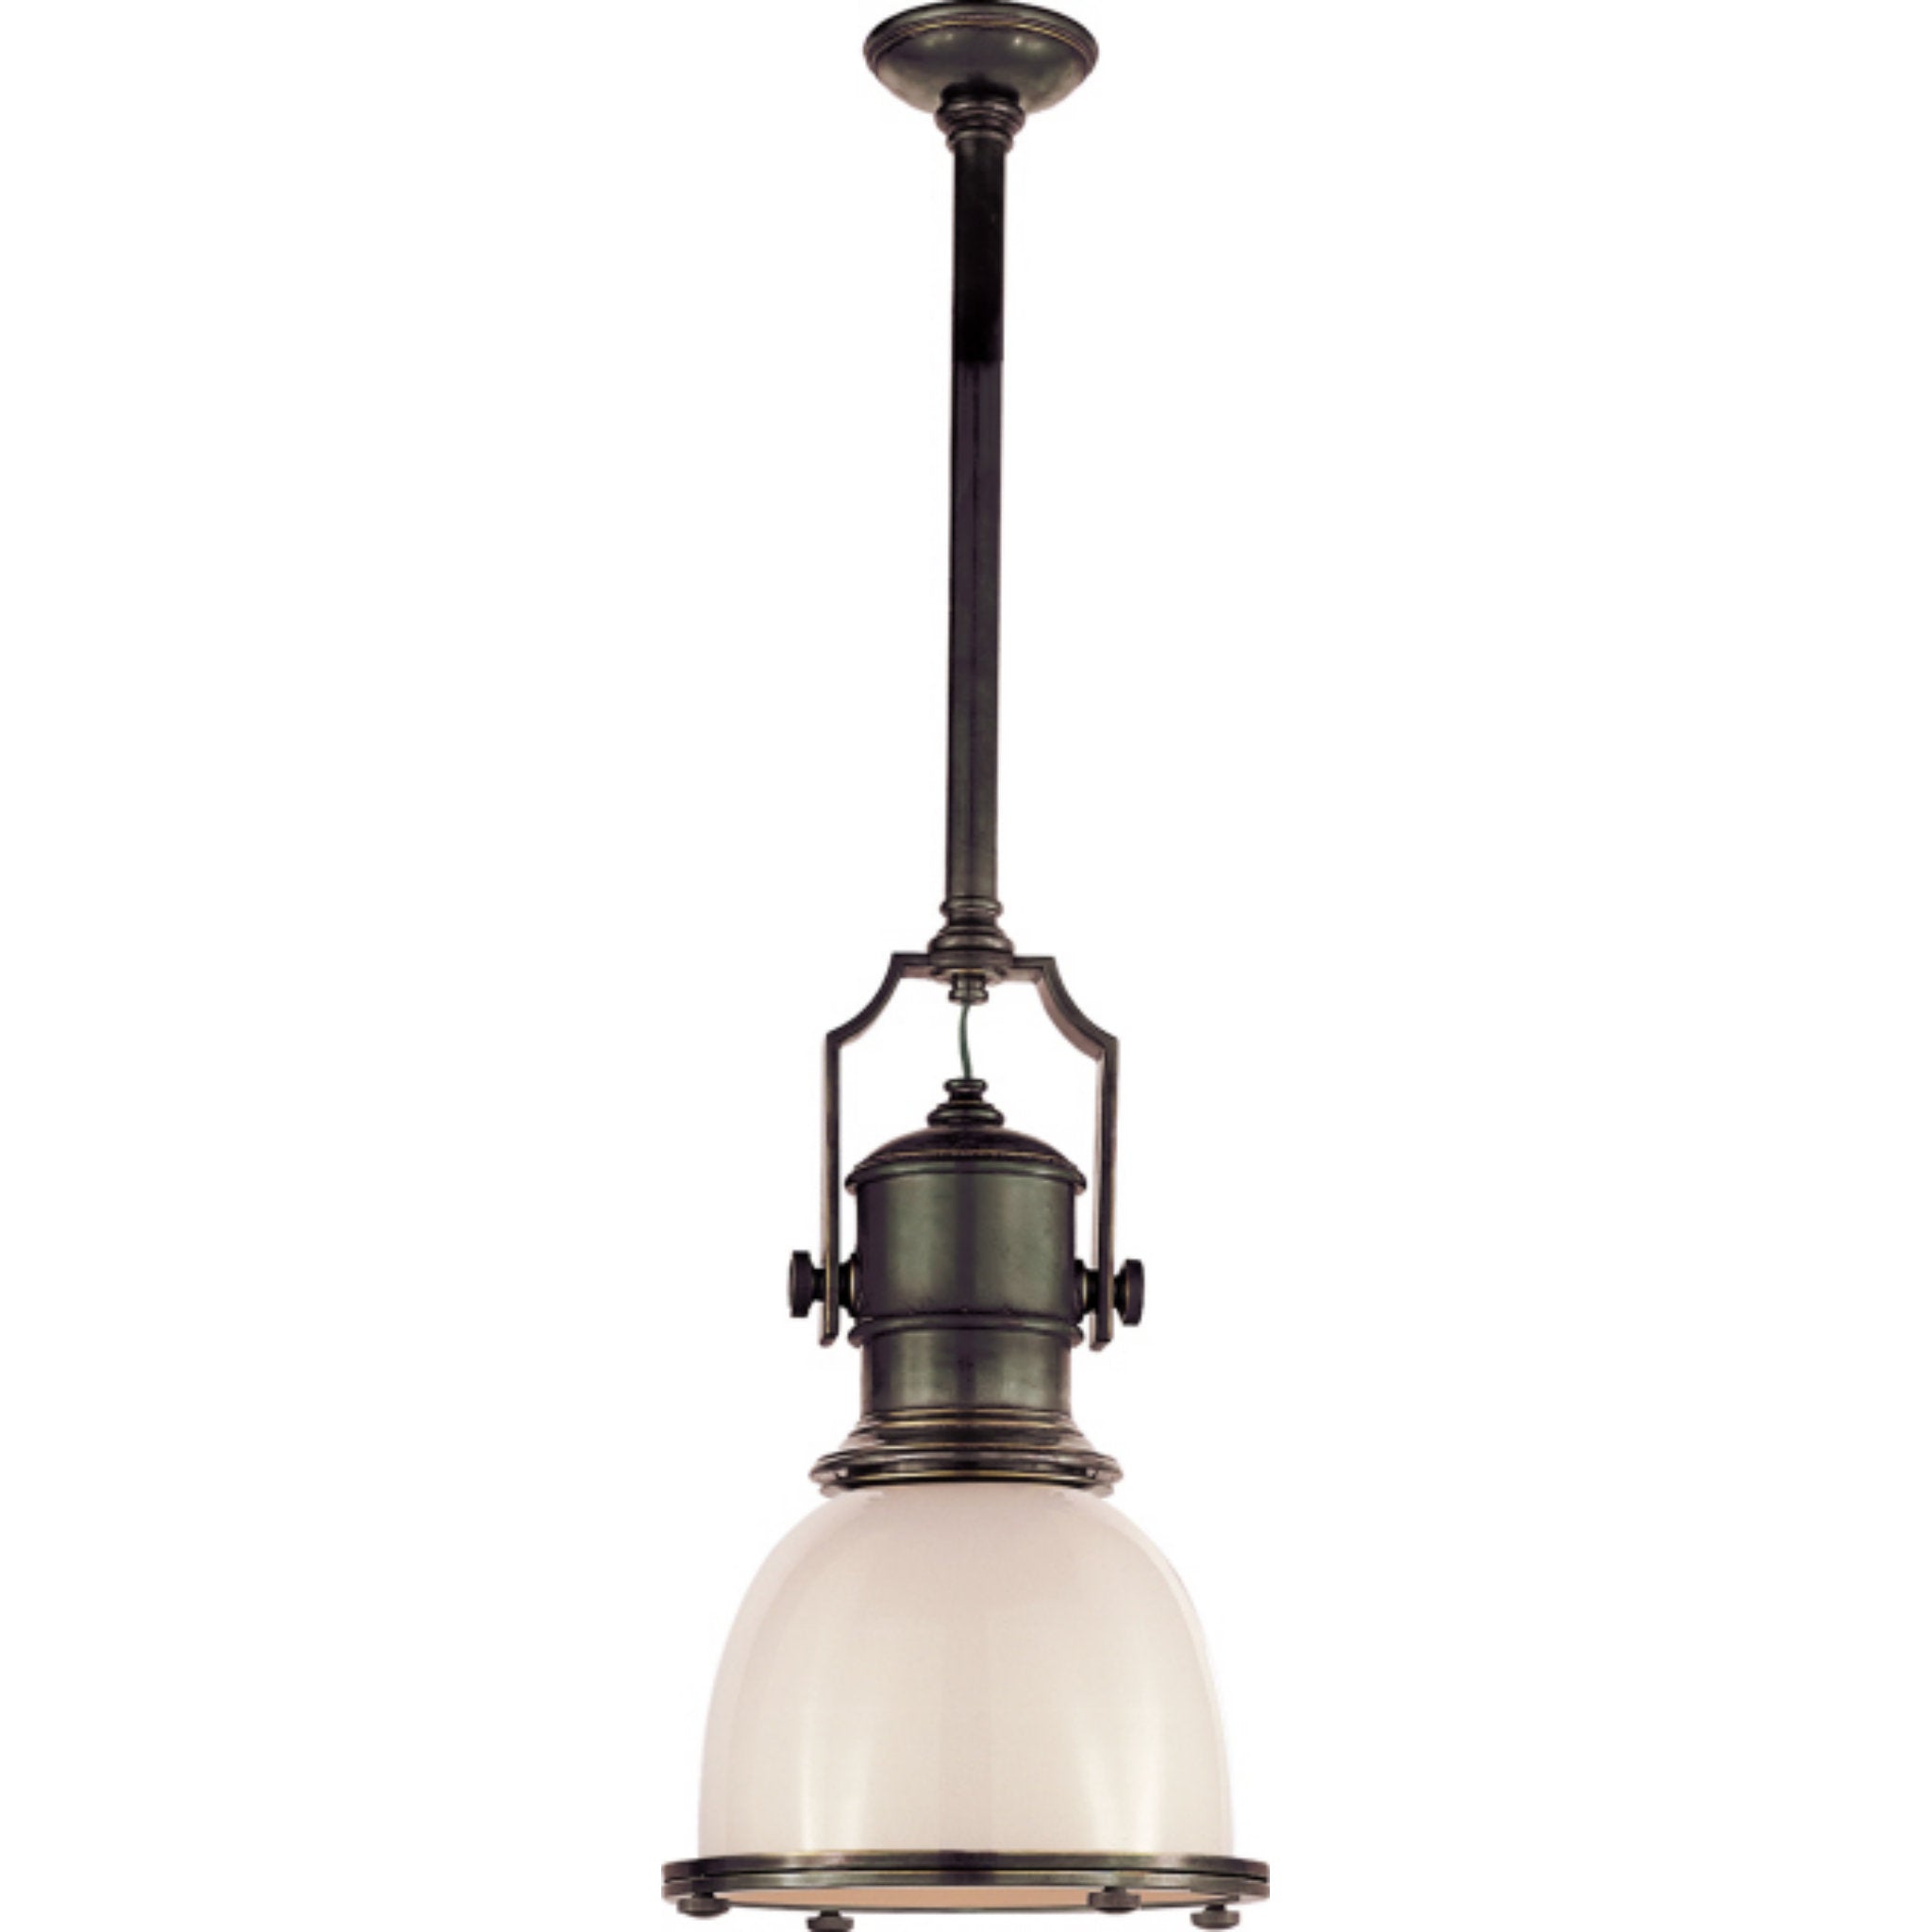 Chapman & Myers Country Industrial Small Pendant in Bronze with White Glass Shade